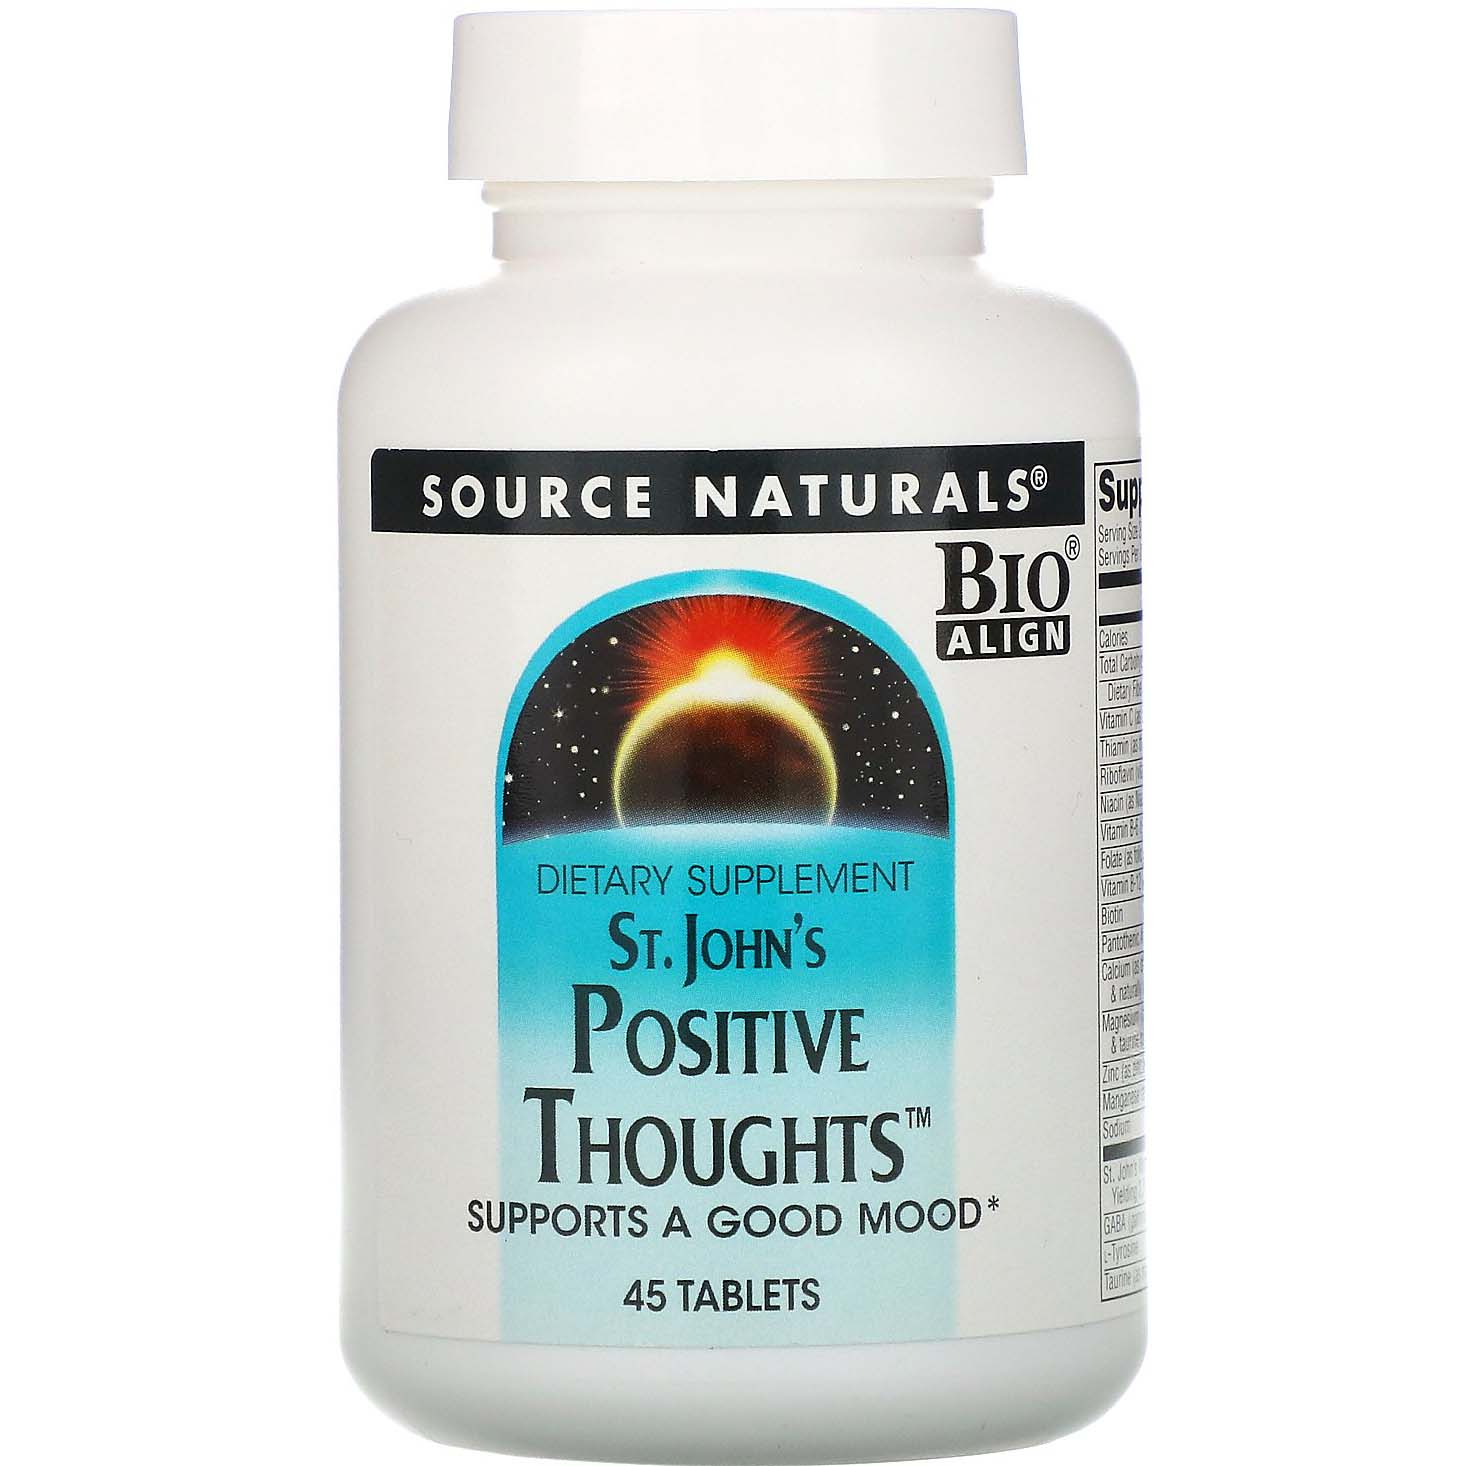 Source Naturals St. John's Positive Thoughts, 45 Tablets